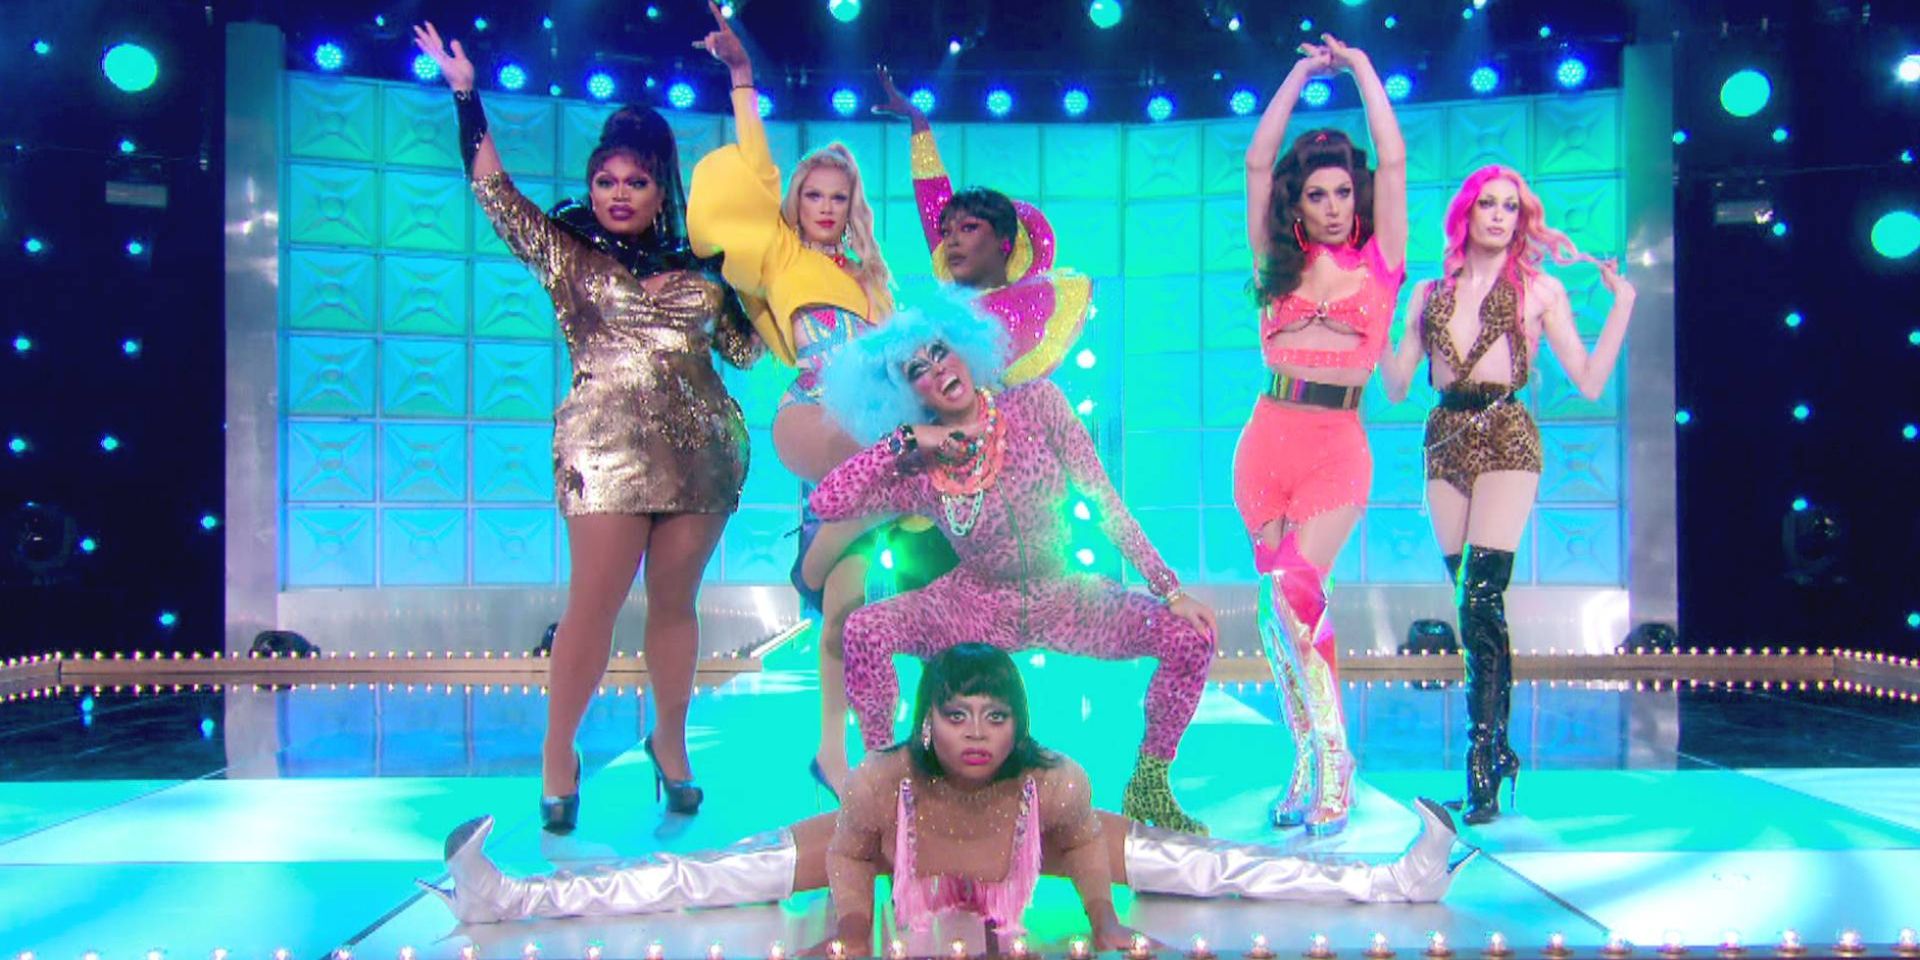 6 queens perform on the stage in RuPaul's Drag Race.